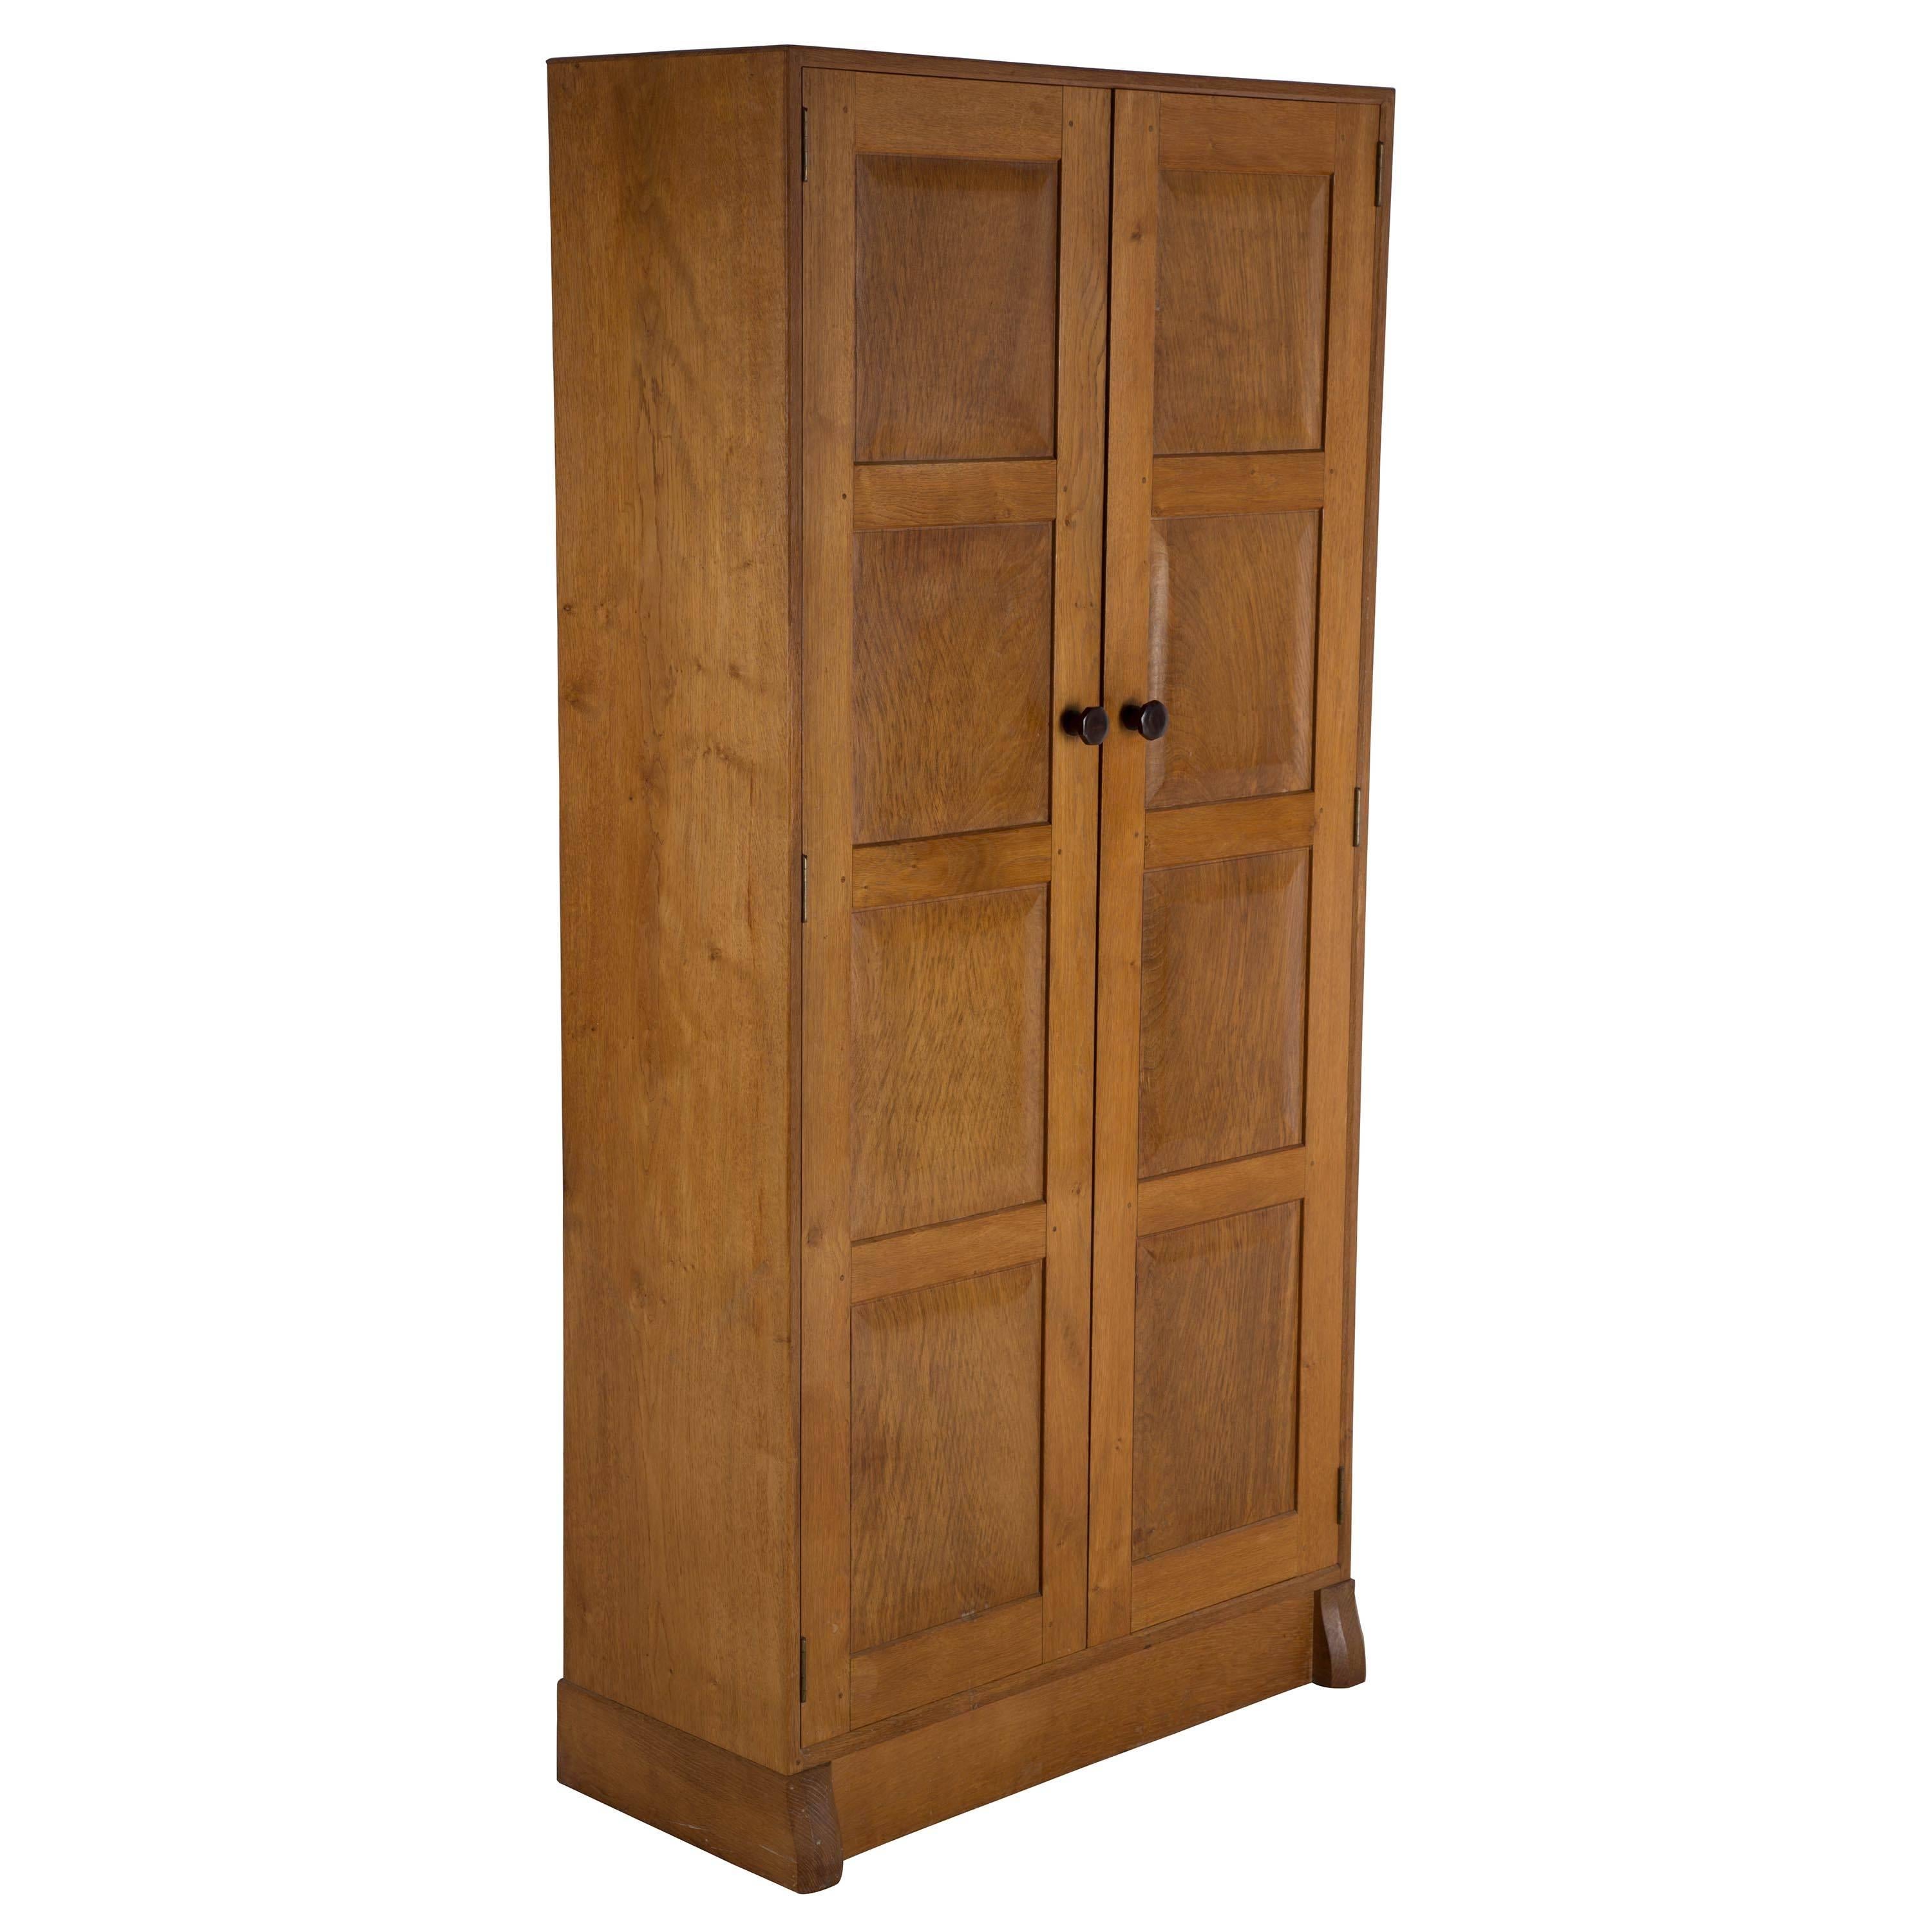 Arts & Crafts Cotswold School oak, cedar and Macassar hall wardrobe, circa 1950. Well constructed with fielded panels, pegged joints and Macassar hardware.